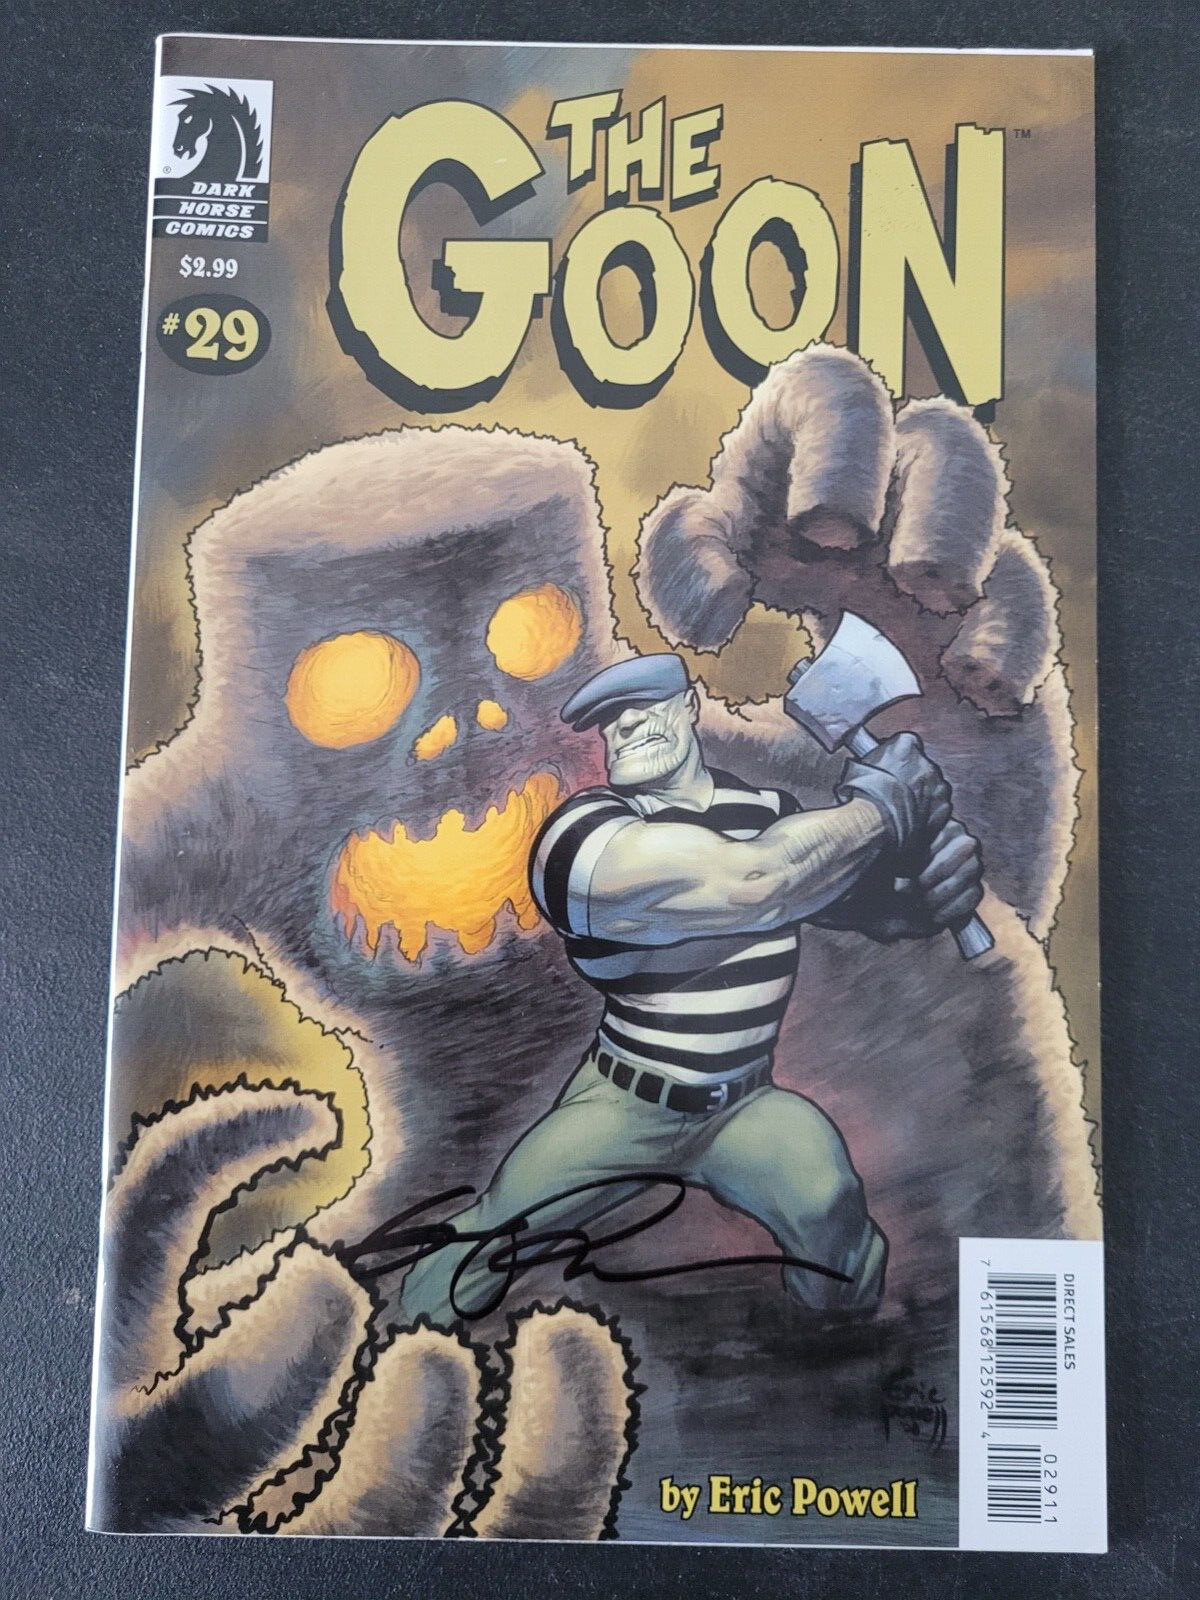 THE GOON #29 (2008) DARK HORSE COMICS AUTOGRAPHED/SIGNED By ERIC POWELL